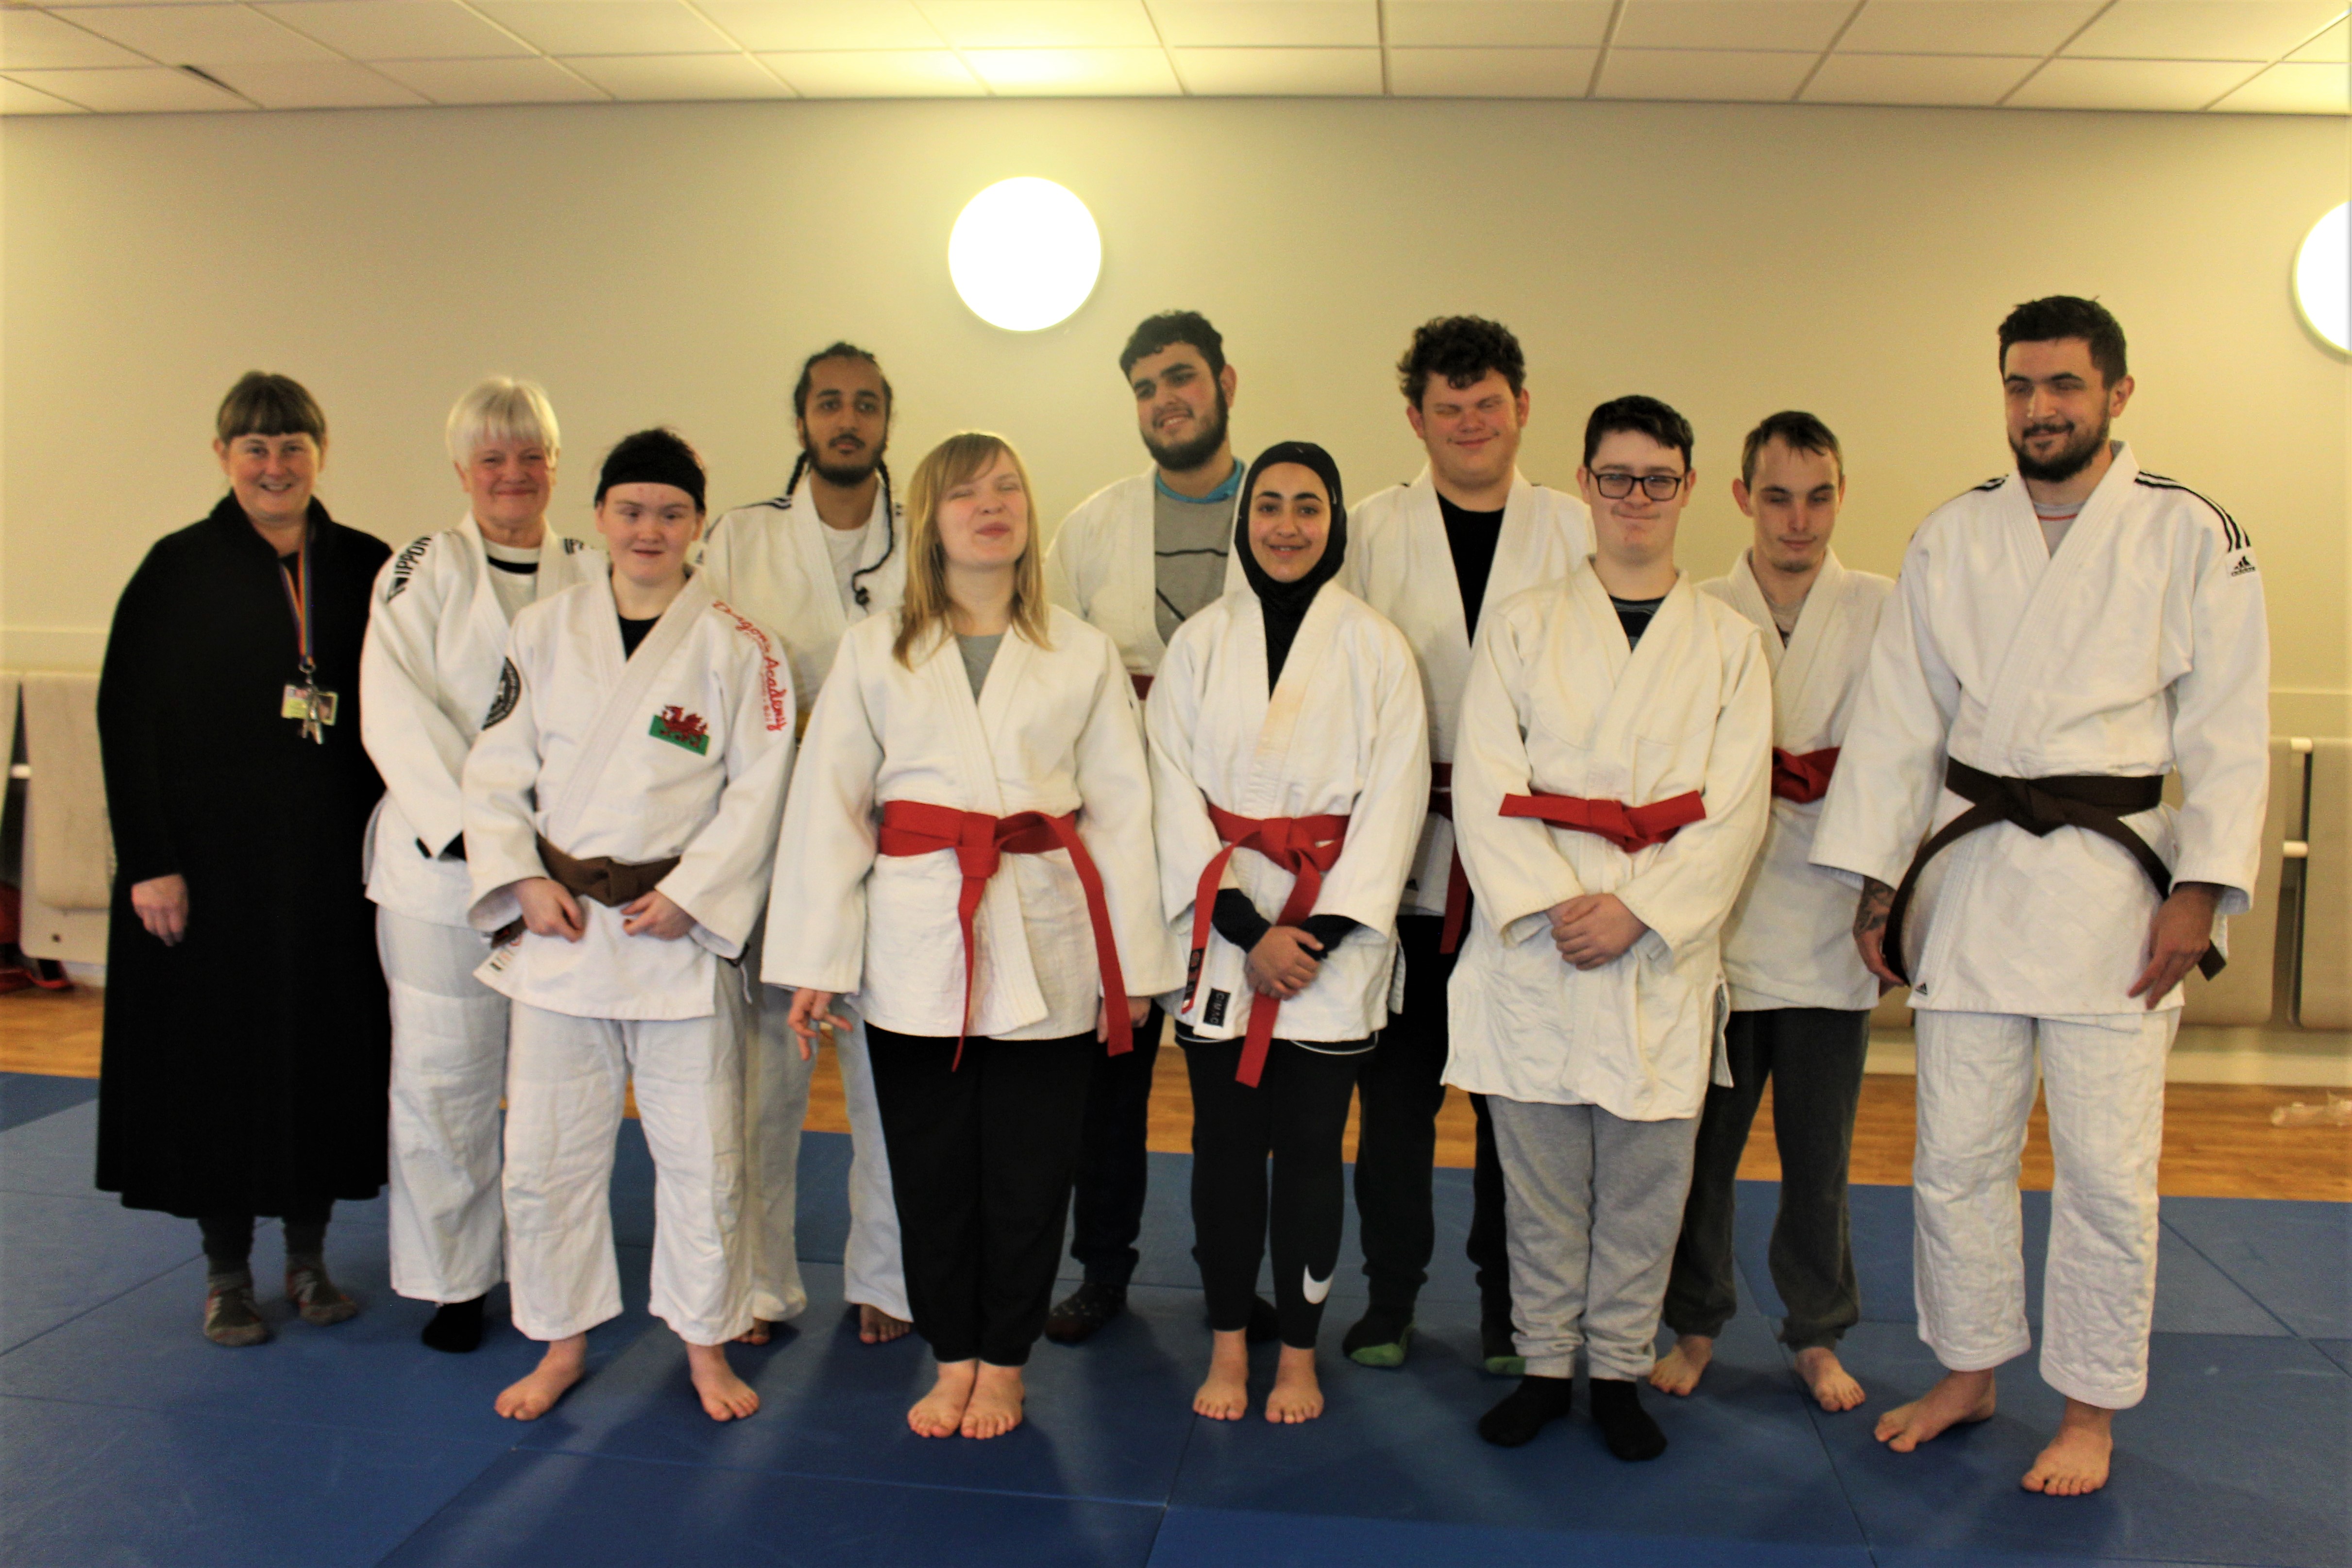 A group of students with Coach and Principal standing barefoot on Judo mats displayng their newly awarded Judo belts